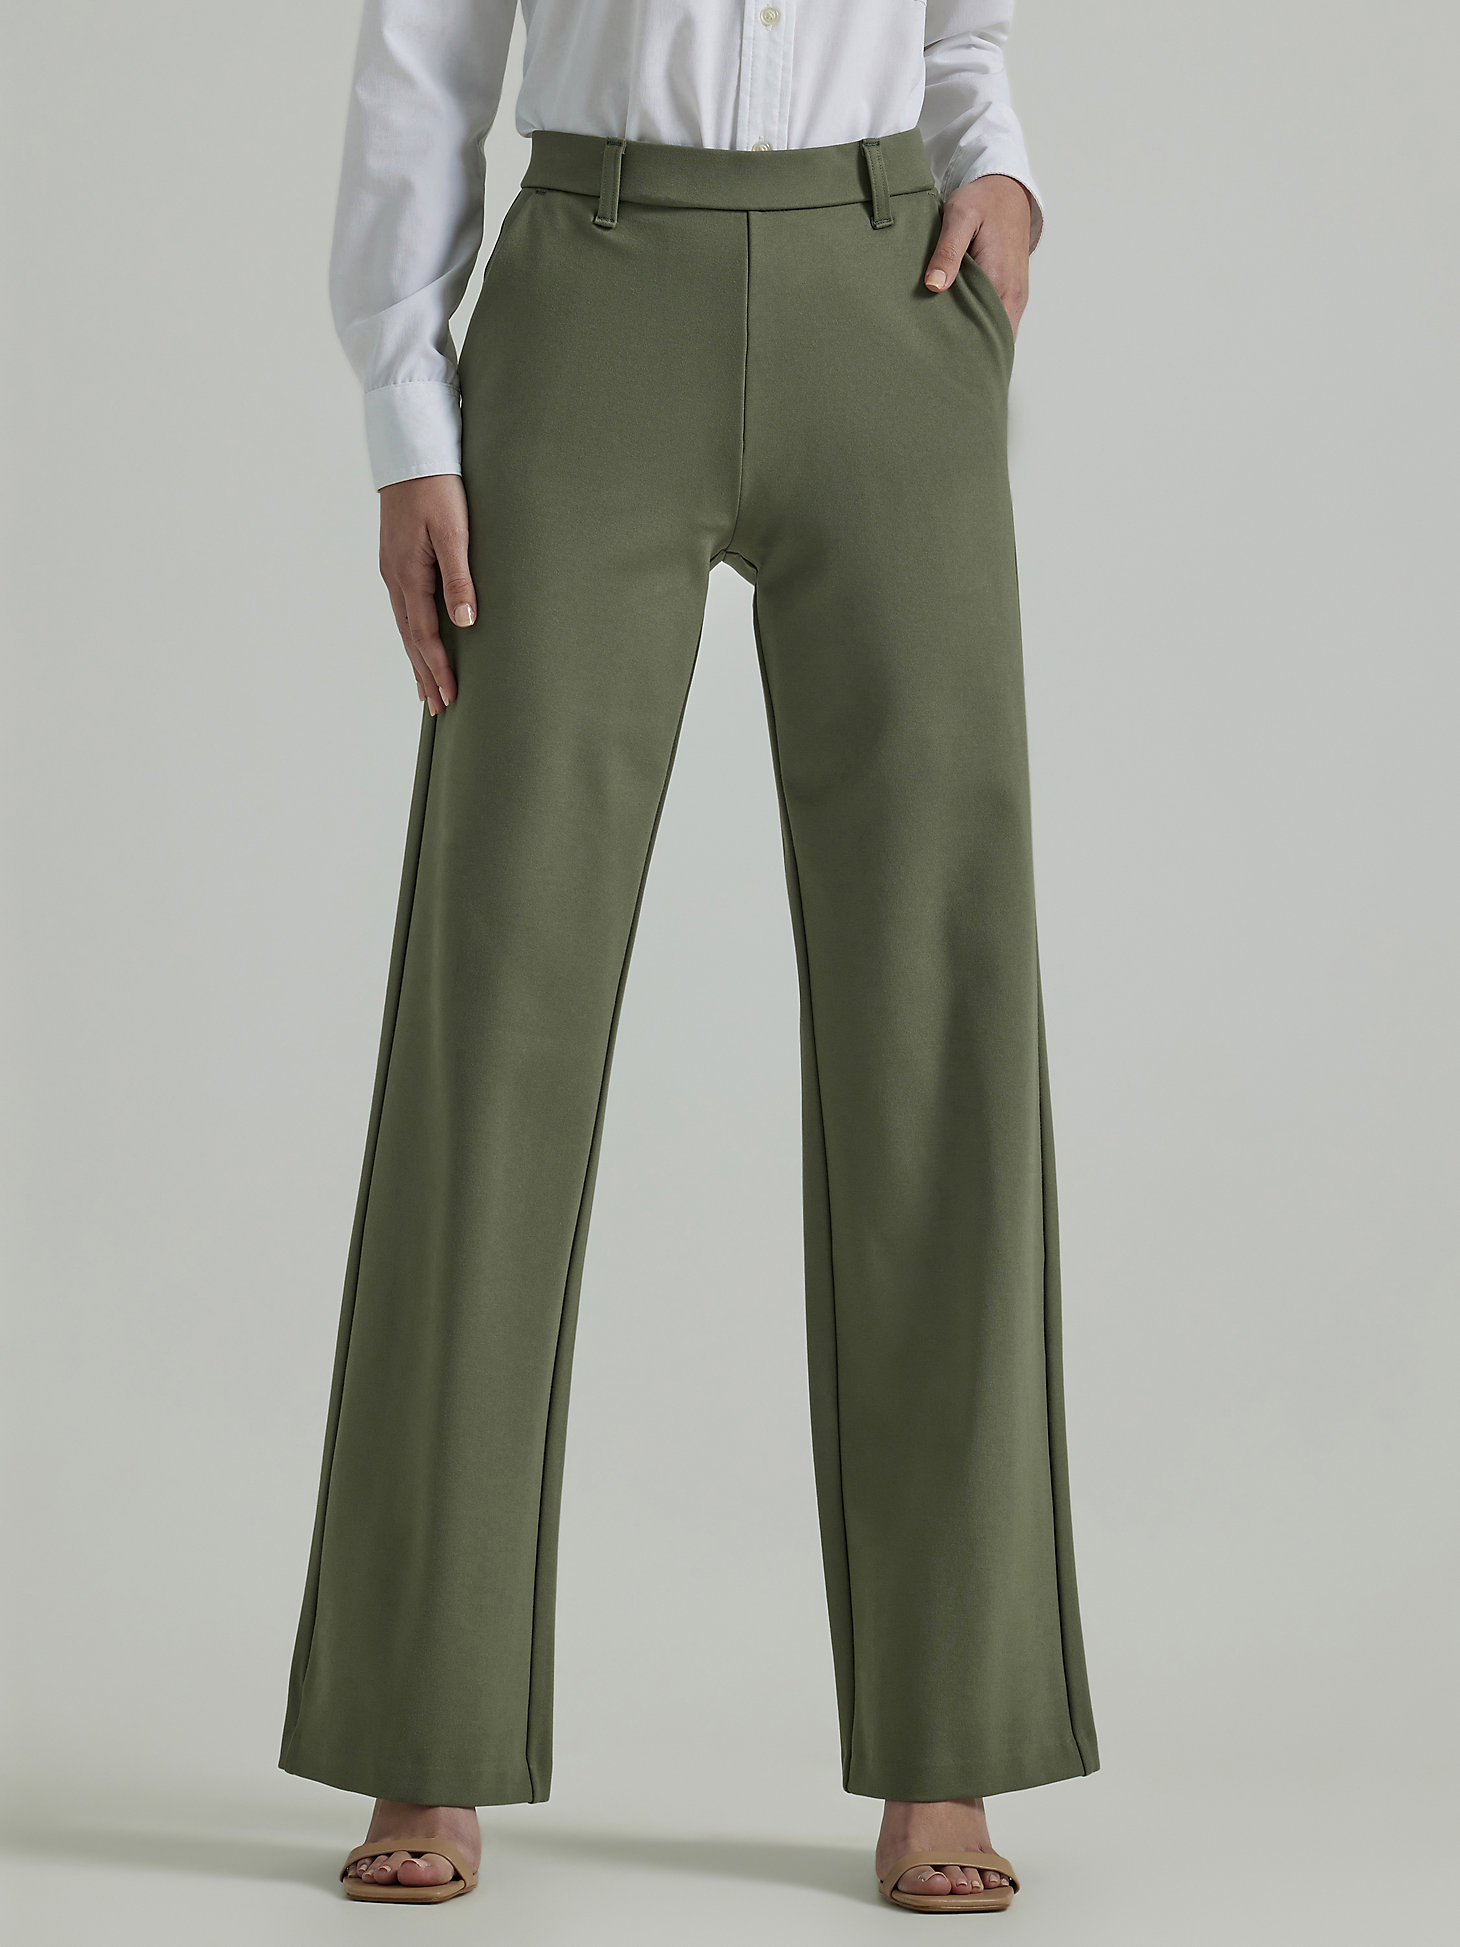 Women's Ultra Lux Comfort Any Wear Wide Leg Pant in Olive Grove main view